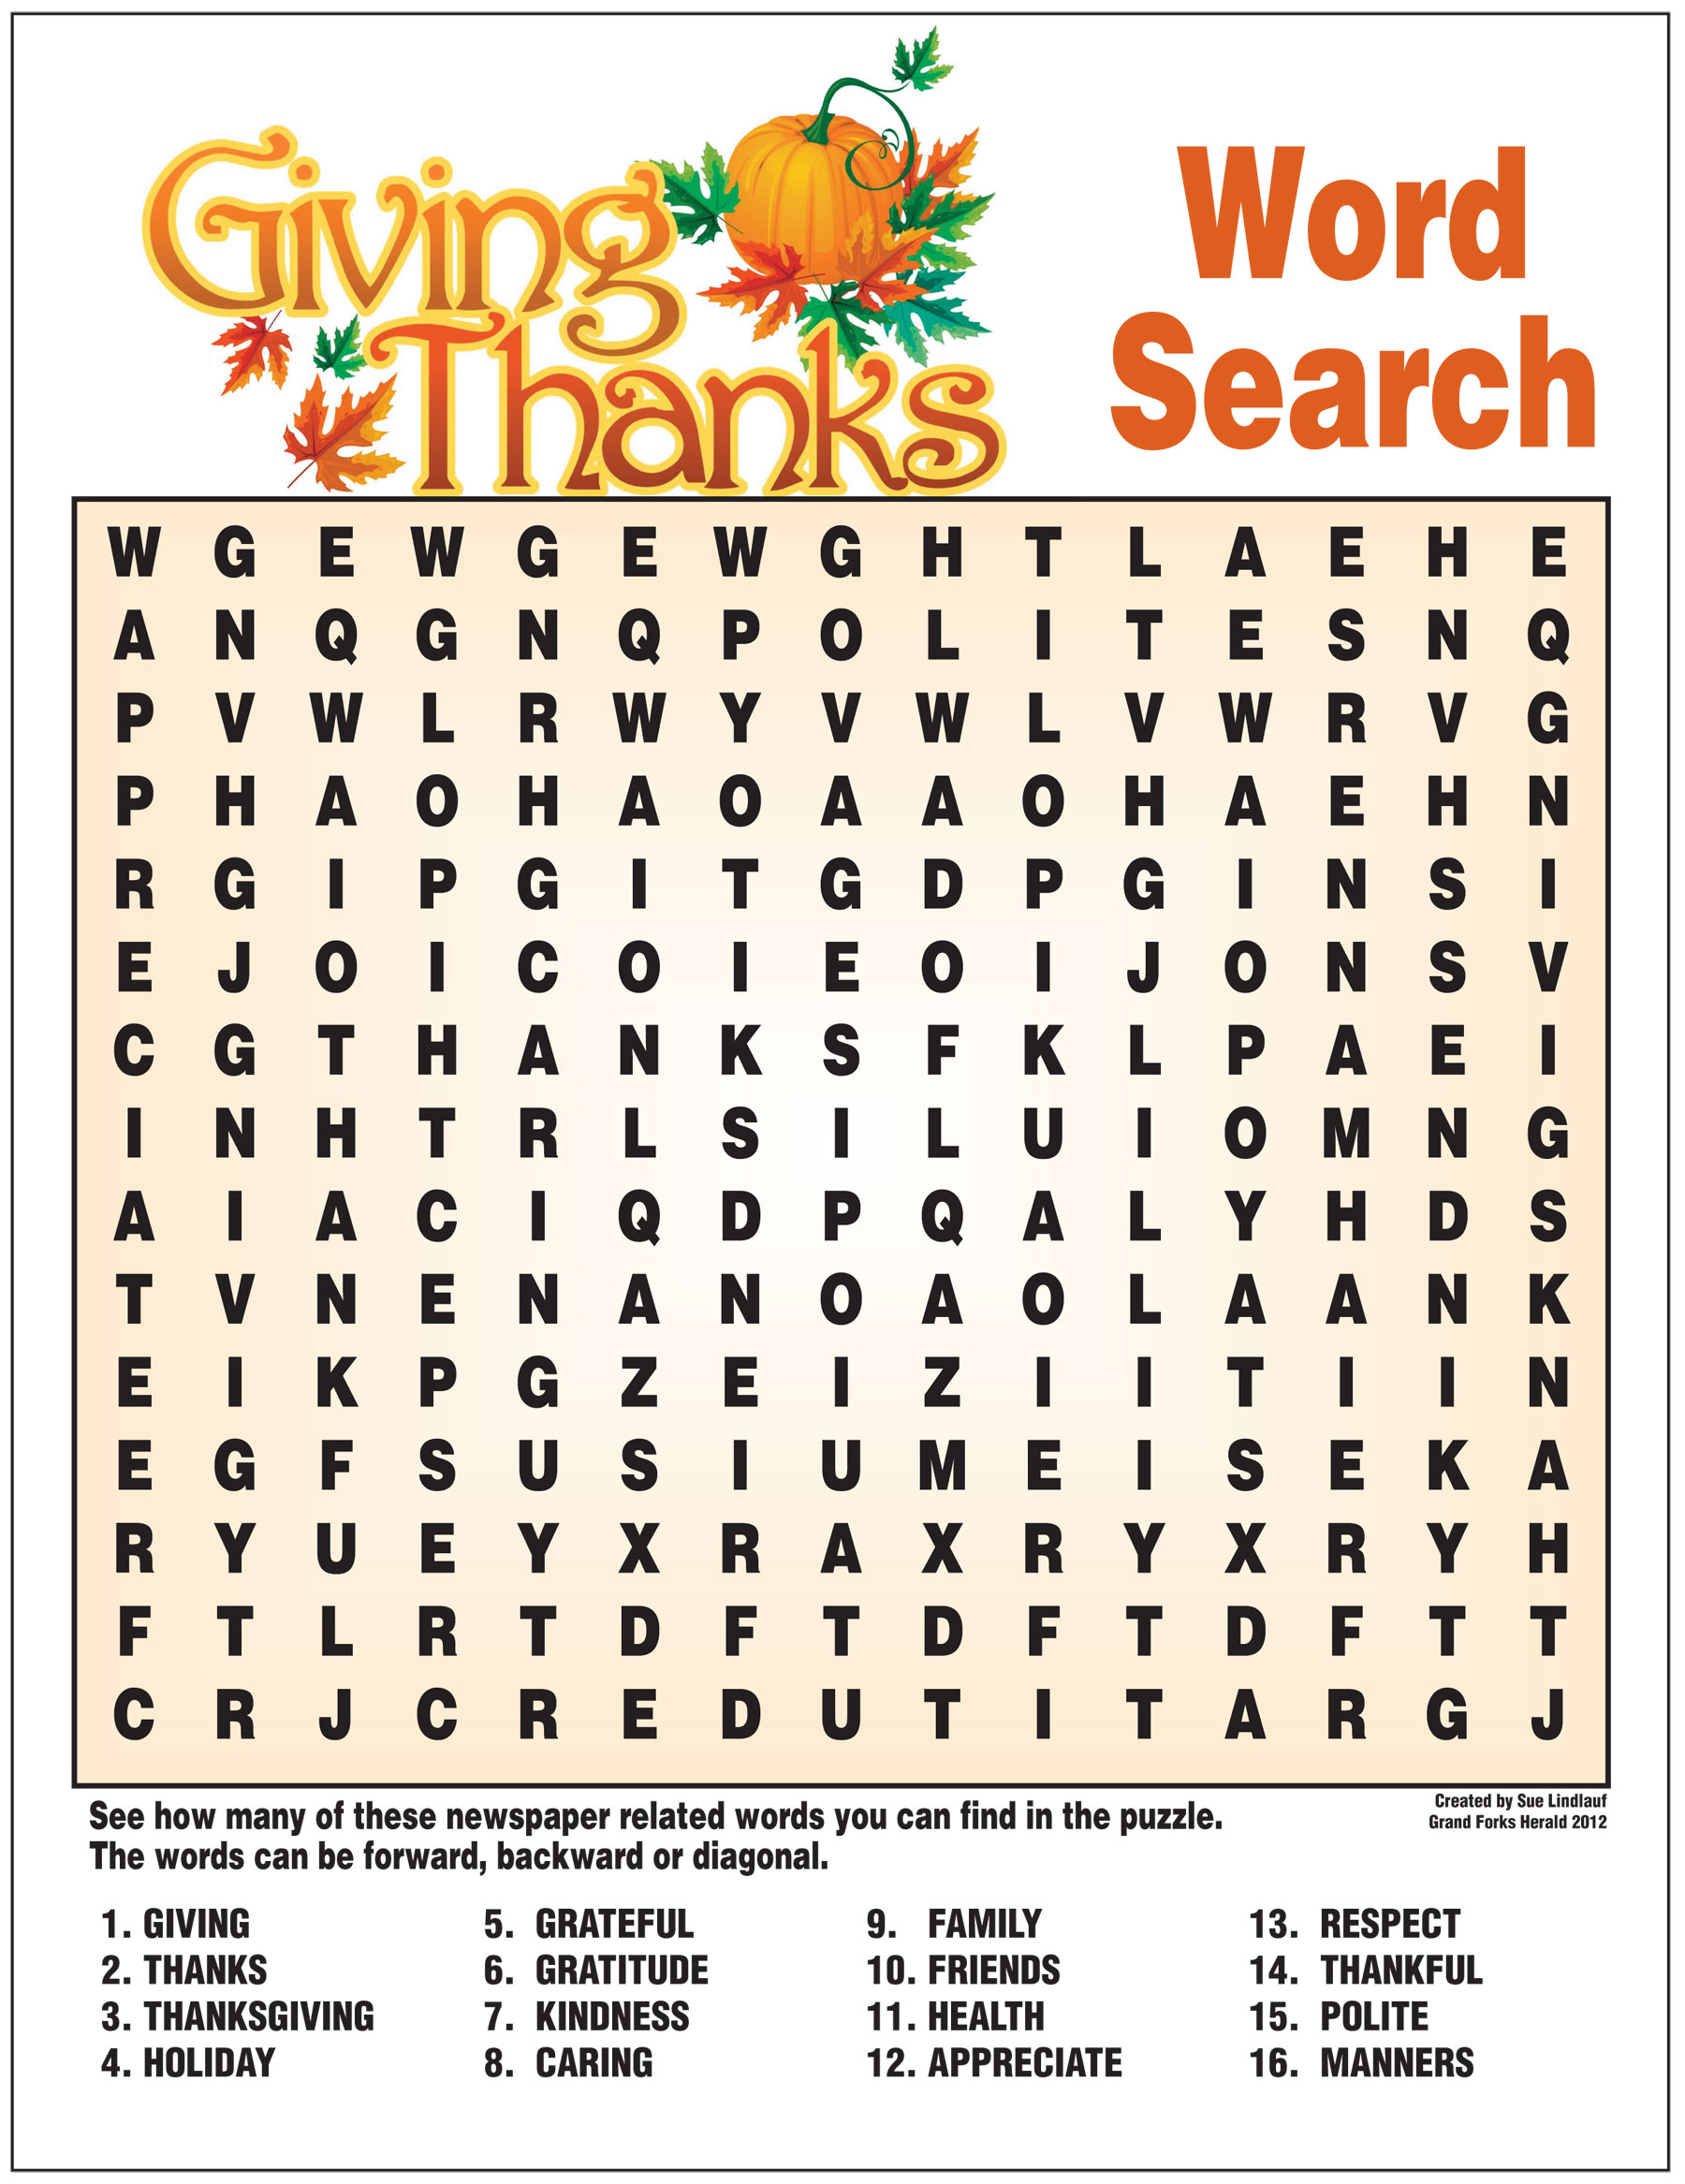 Giving Thanks Word Search Border Puzzle Maker Online ~ Themarketonholly - Word Search Maker Online Free Printable